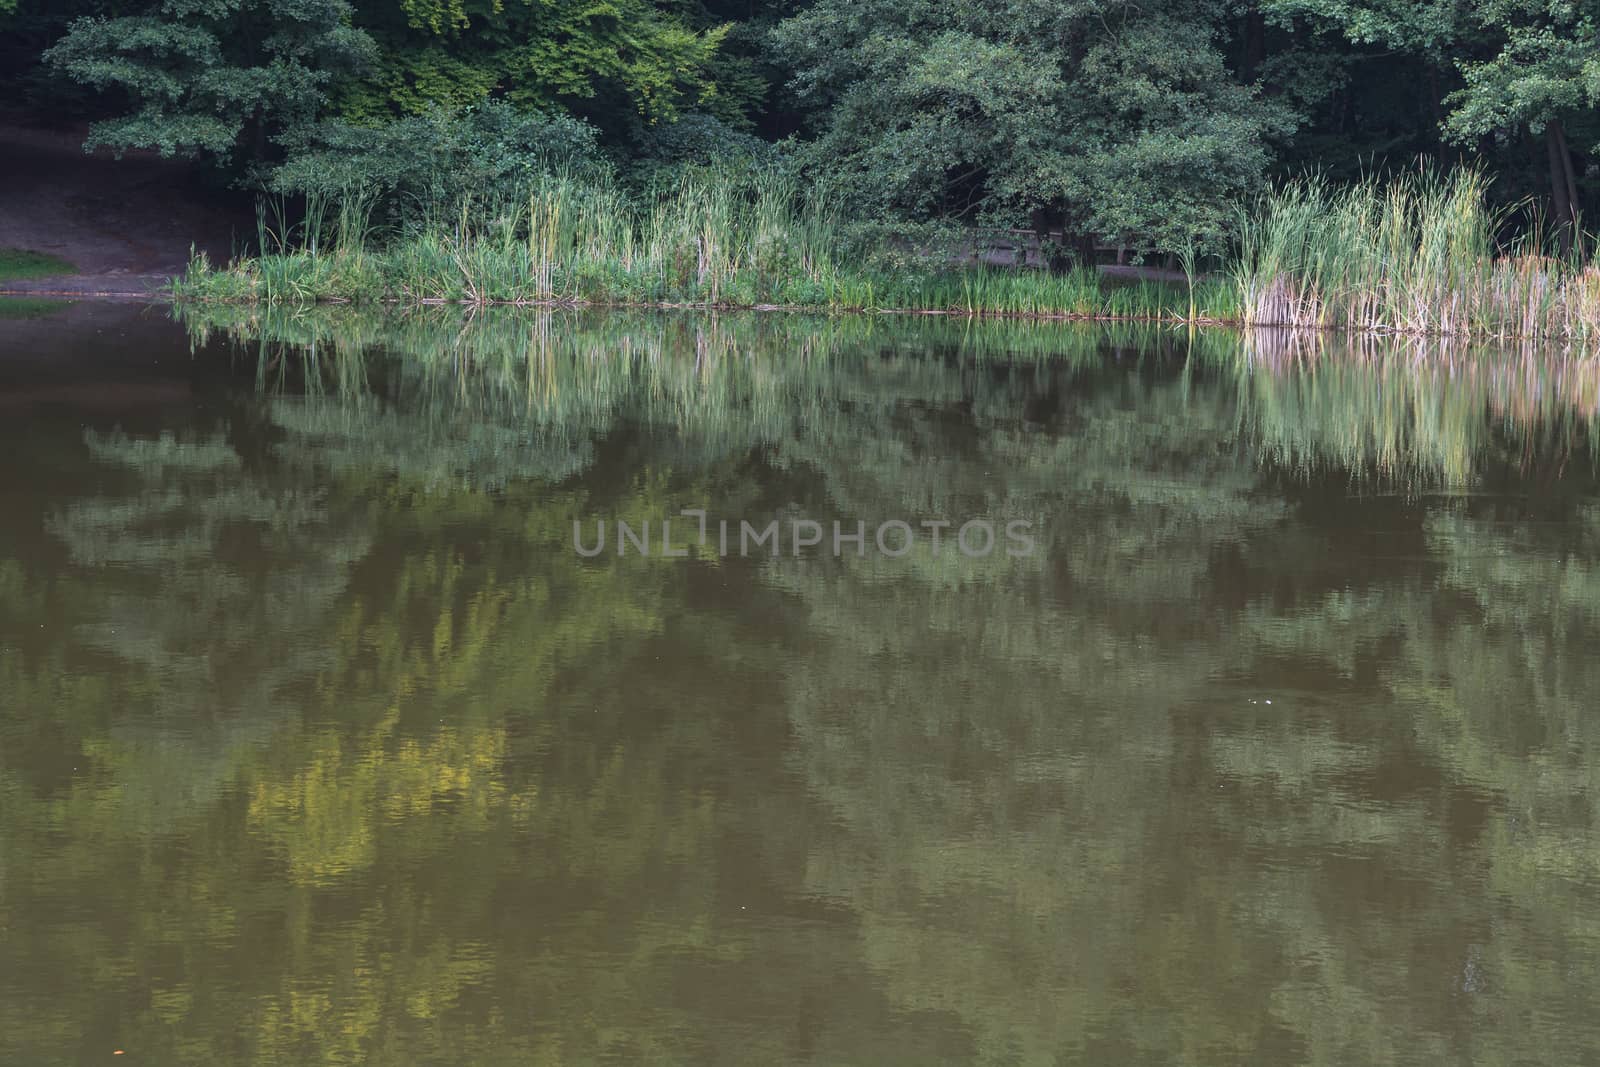 Idyllic calm pond landscape in the forest. Trees and plants are reflected in the water.